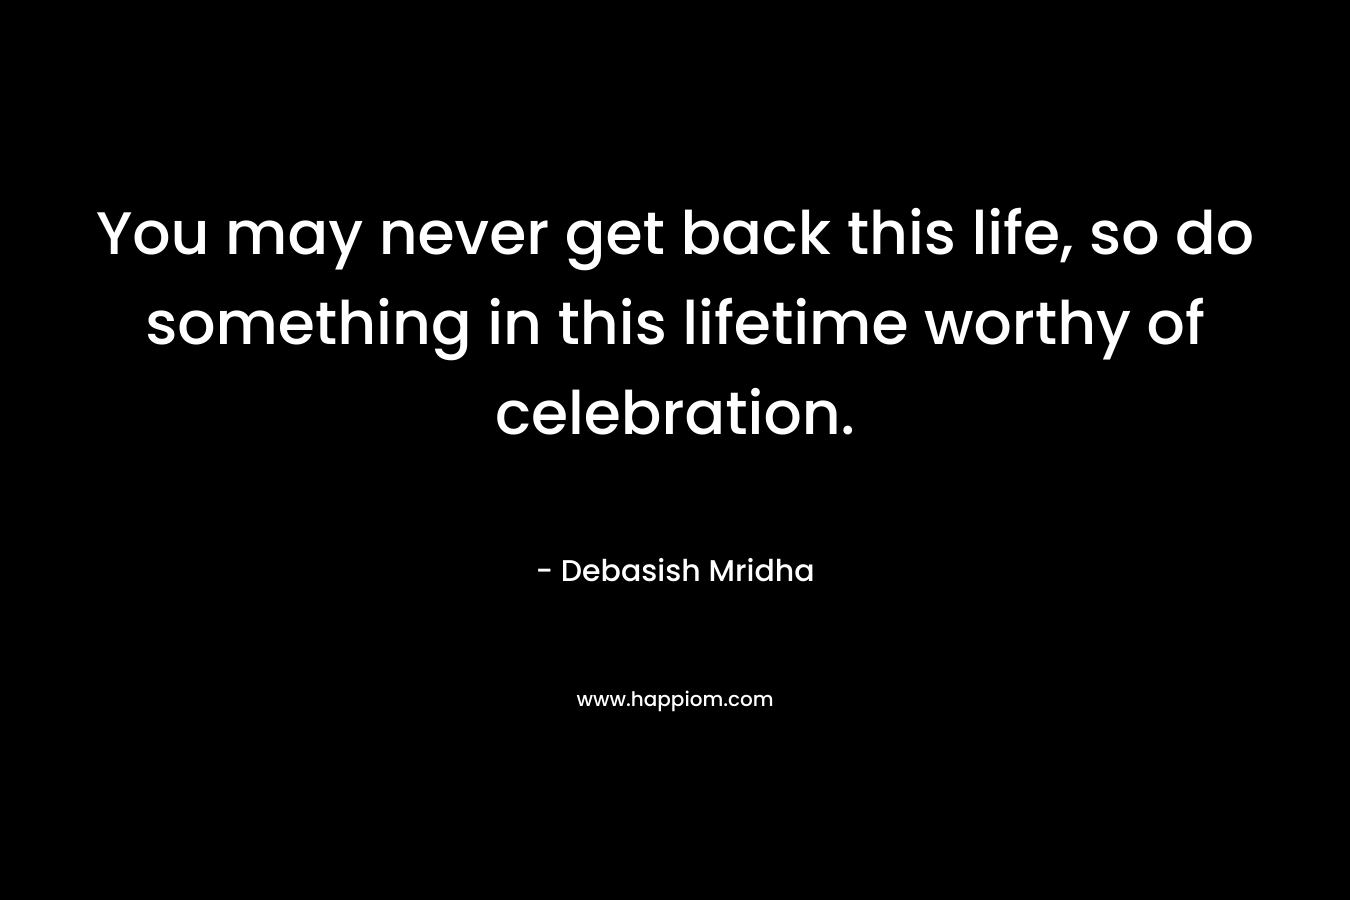 You may never get back this life, so do something in this lifetime worthy of celebration. – Debasish Mridha